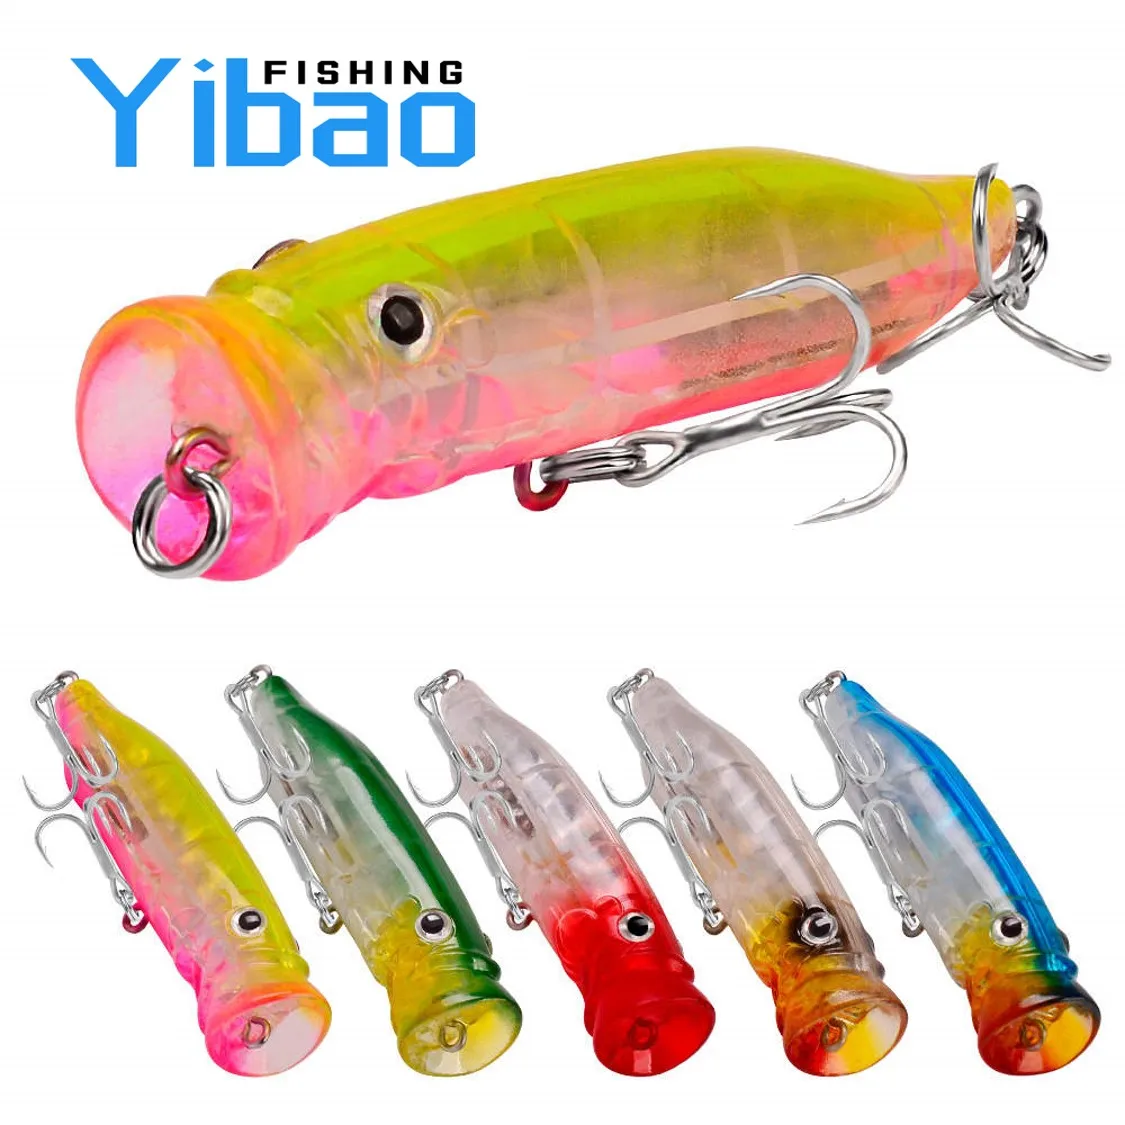 

Topwater Fishing Lure 7cm 9g Artificial Bait Sea Top water Tuna Trout Lure Fish Saltwater Bass Pike Fish SwimBait Popper Lures, 6 colors